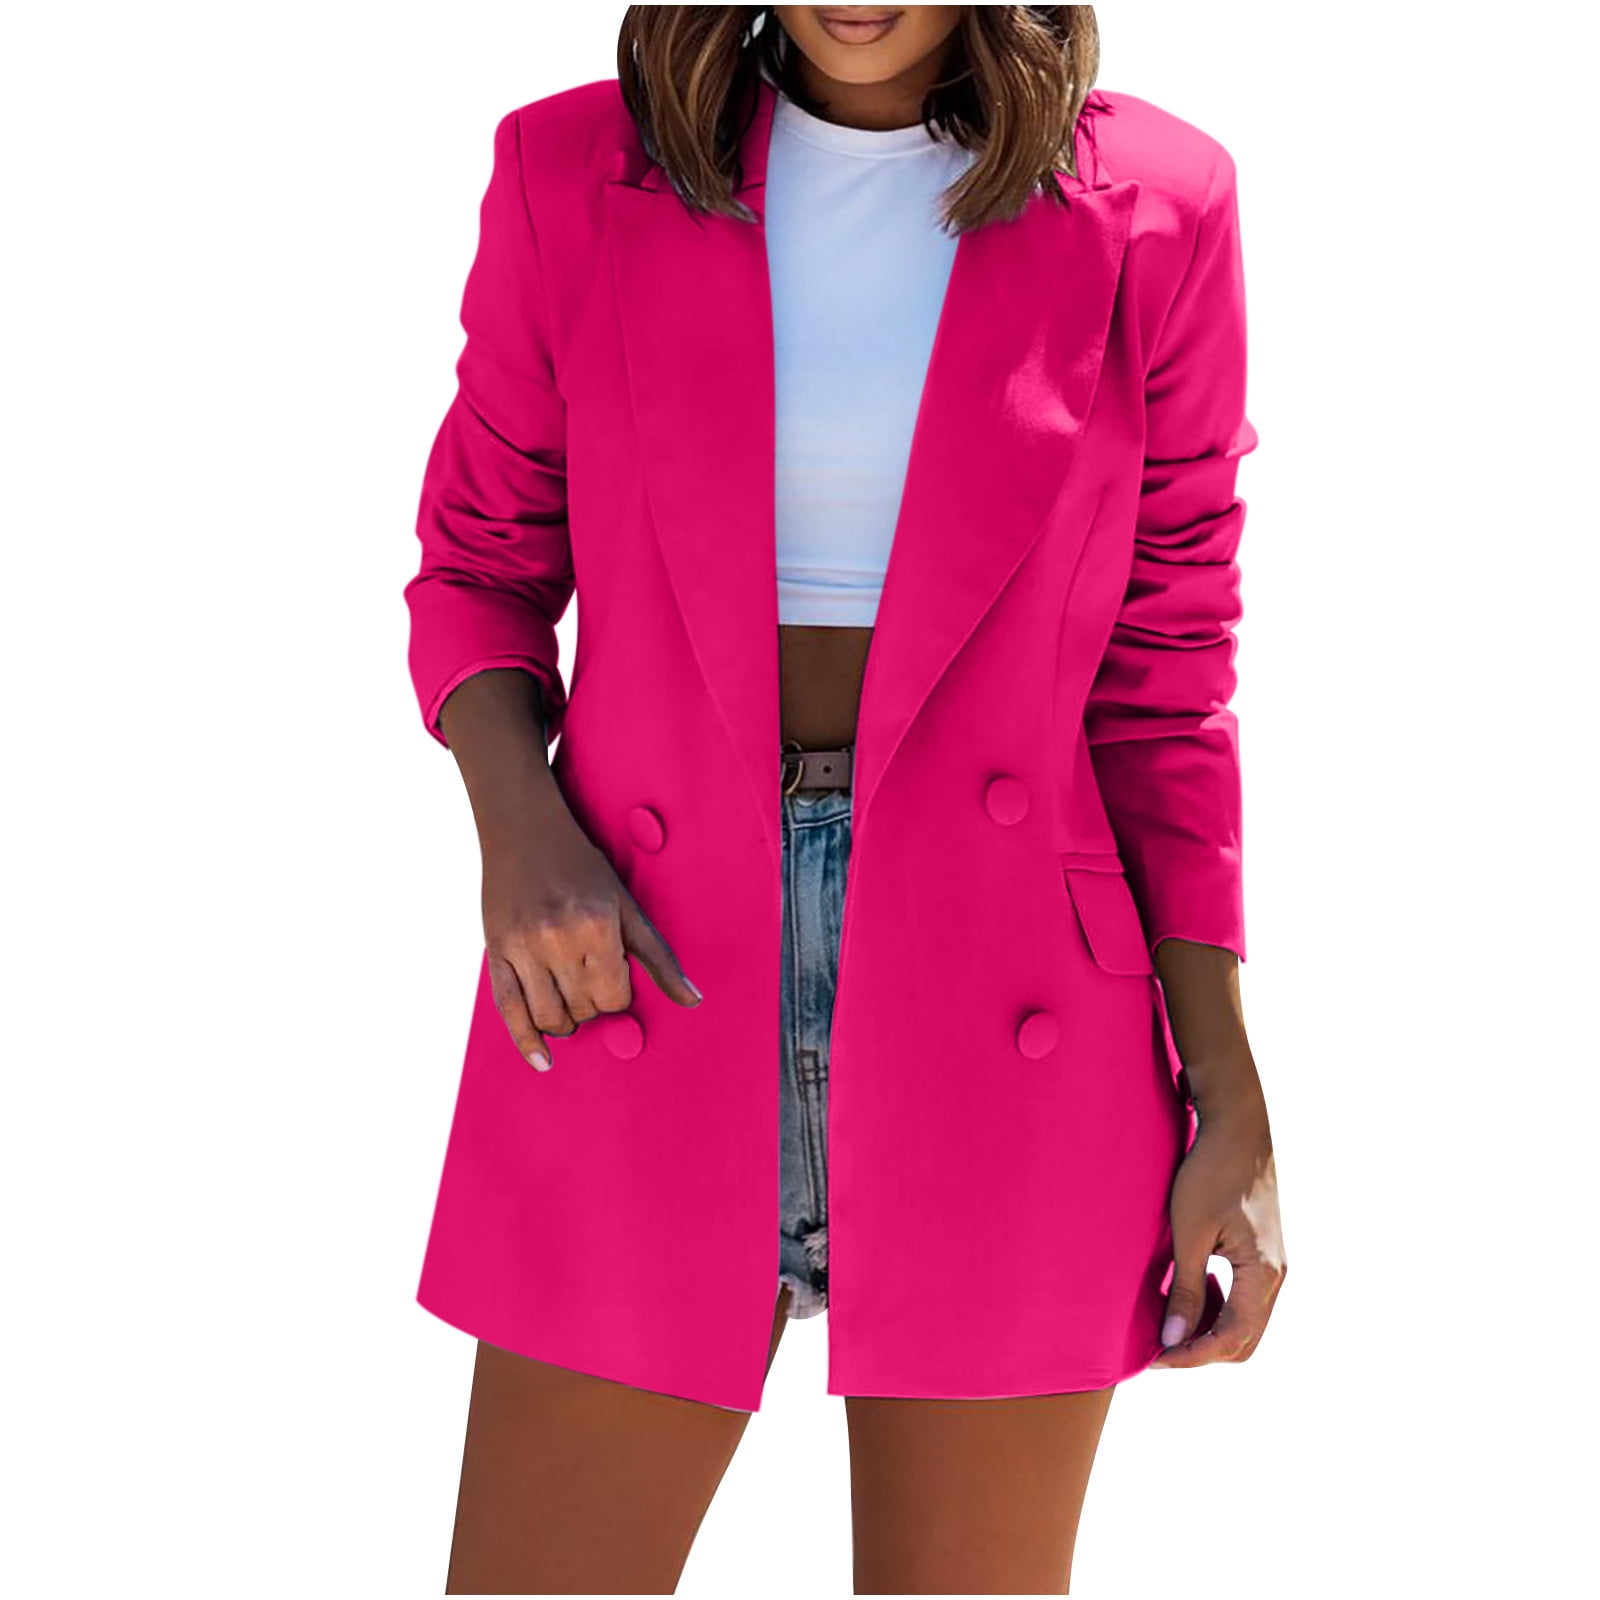 BVnarty Women's Jacket Coat Plus Size Solid Color Long Sleeve Lightweight  Shacket Jacket Casual Suit Collar Open Front Business Commute Office  Cardigan Winter Fashion Top Pink XXL 